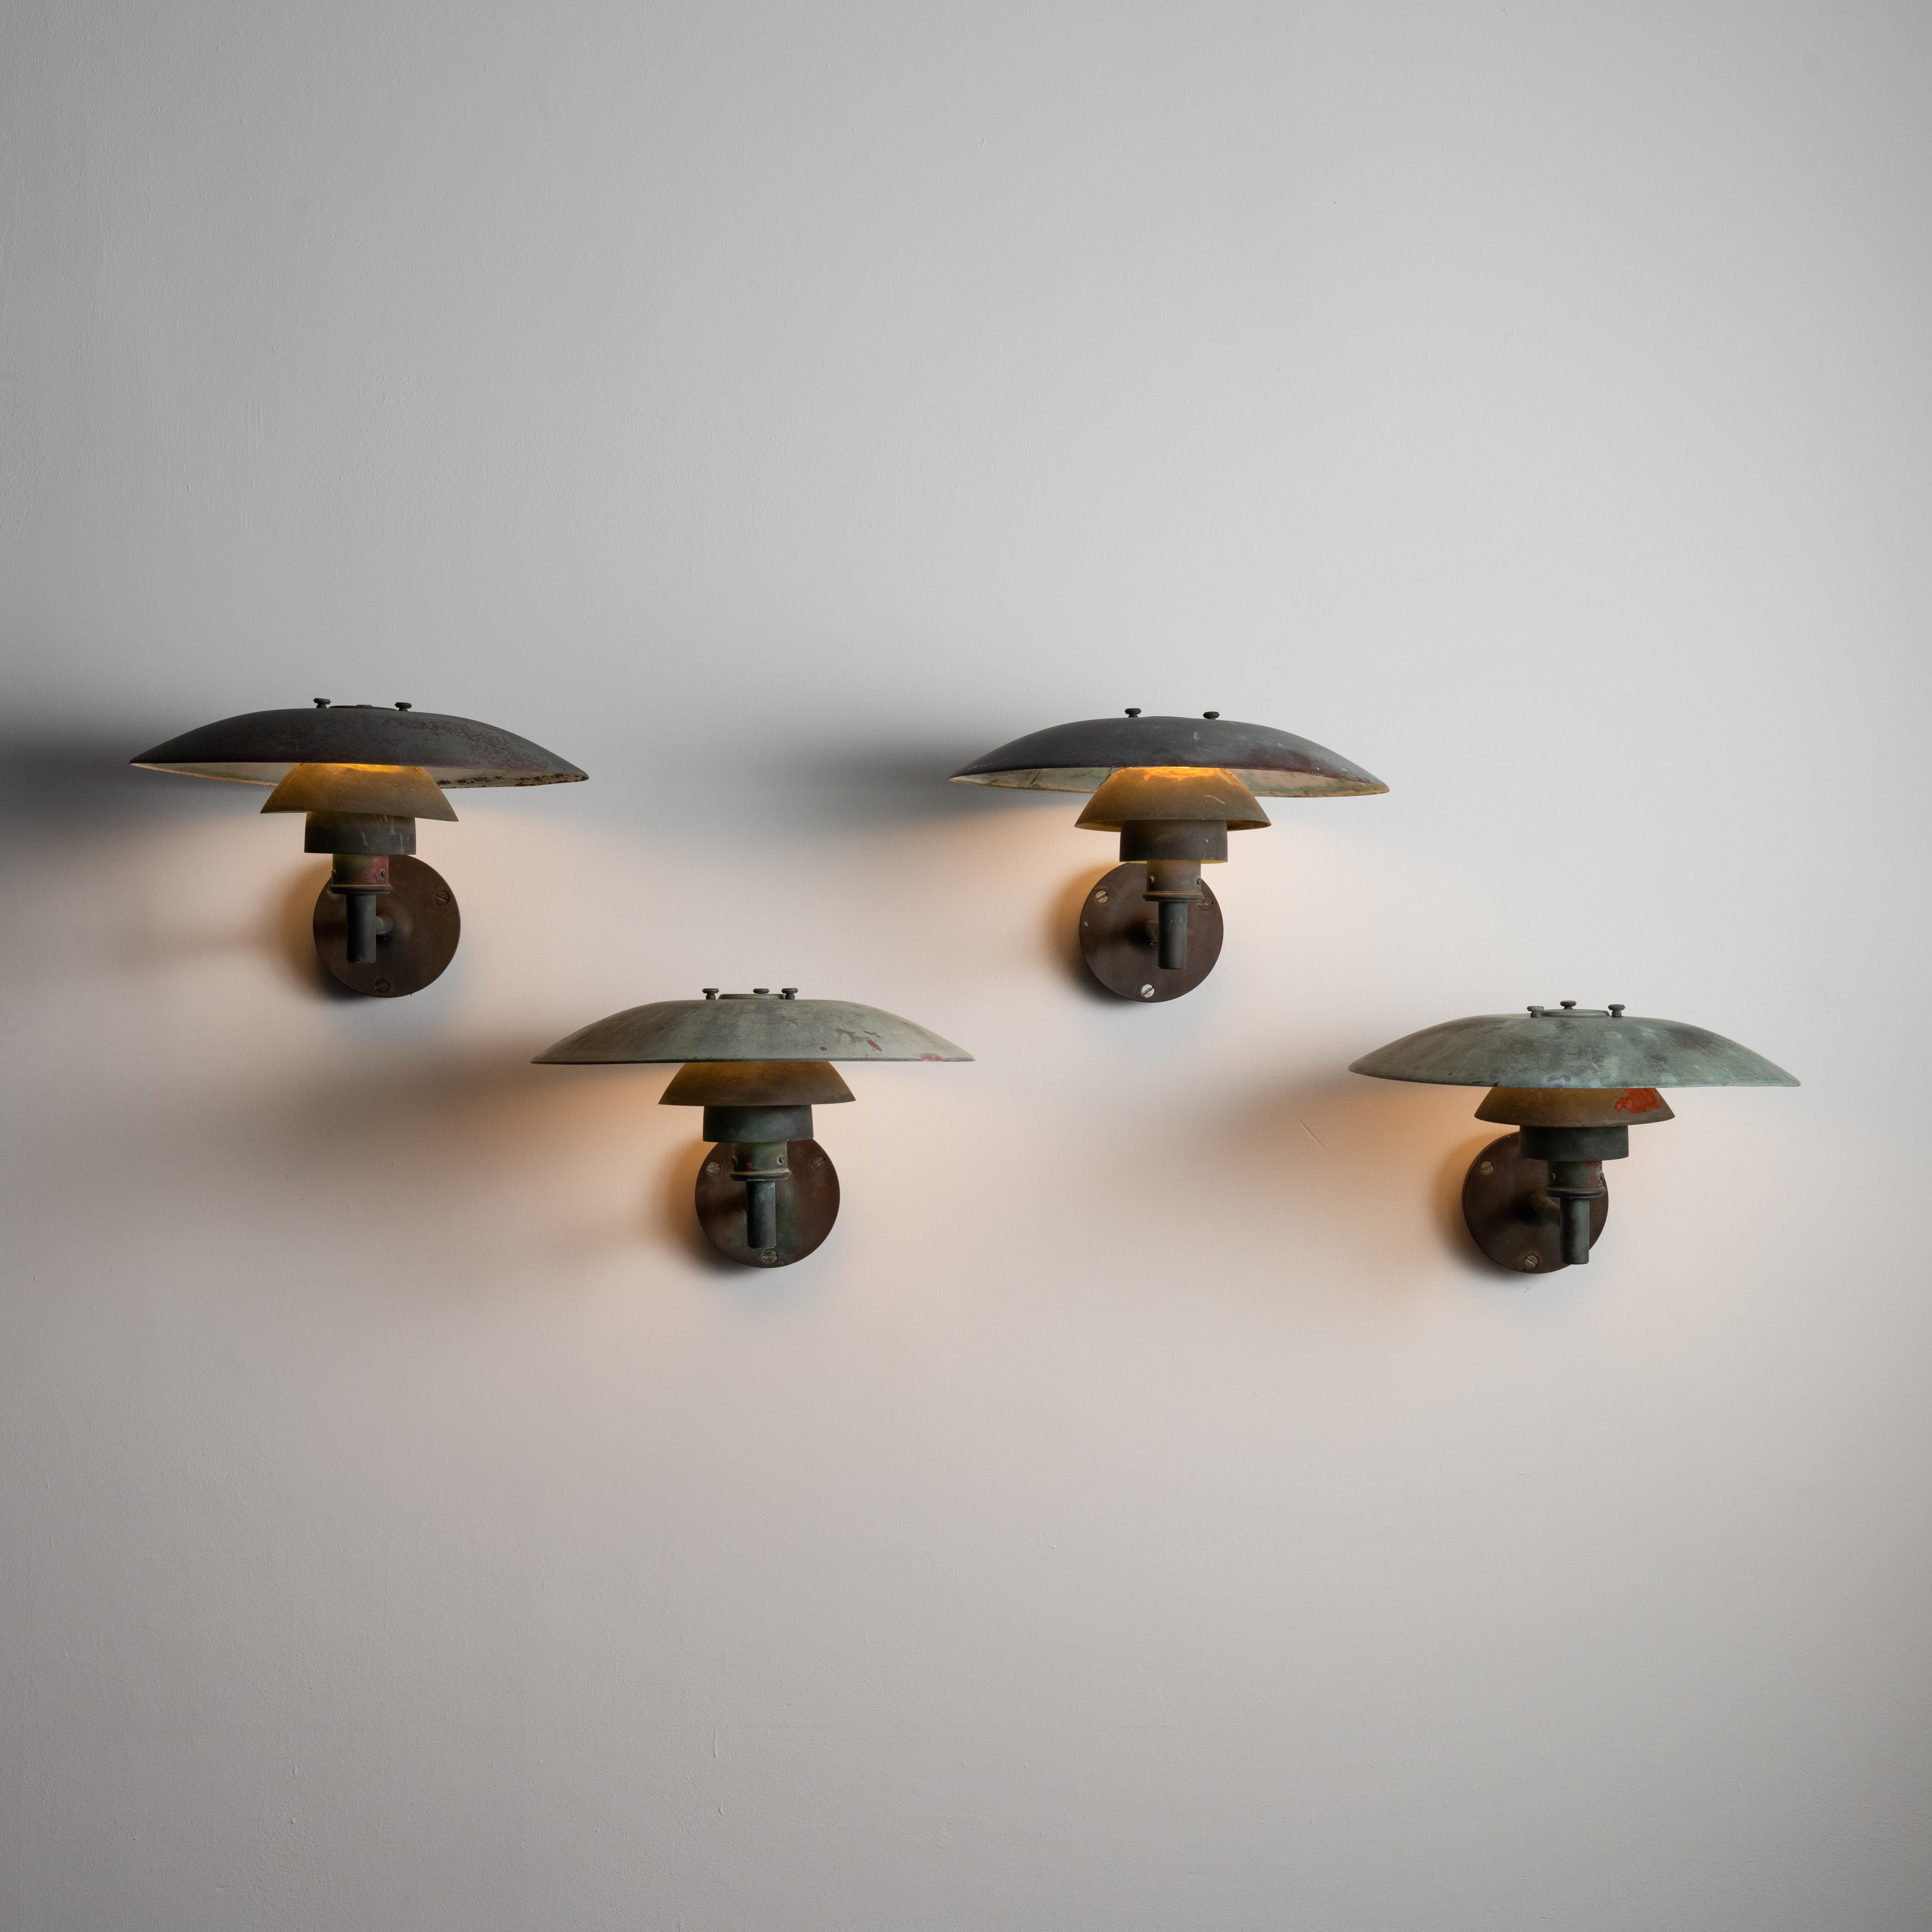 Ph 4/3 wall sconces by Poul Henningsen for Louis Poulsen. Designed and manufactured in Denmark, circa the 1960s. All copper sconces true to Henningsen's original tiered designs for Louis Poulsen. Beautifully aged fixtures meant for indoor or outdoor